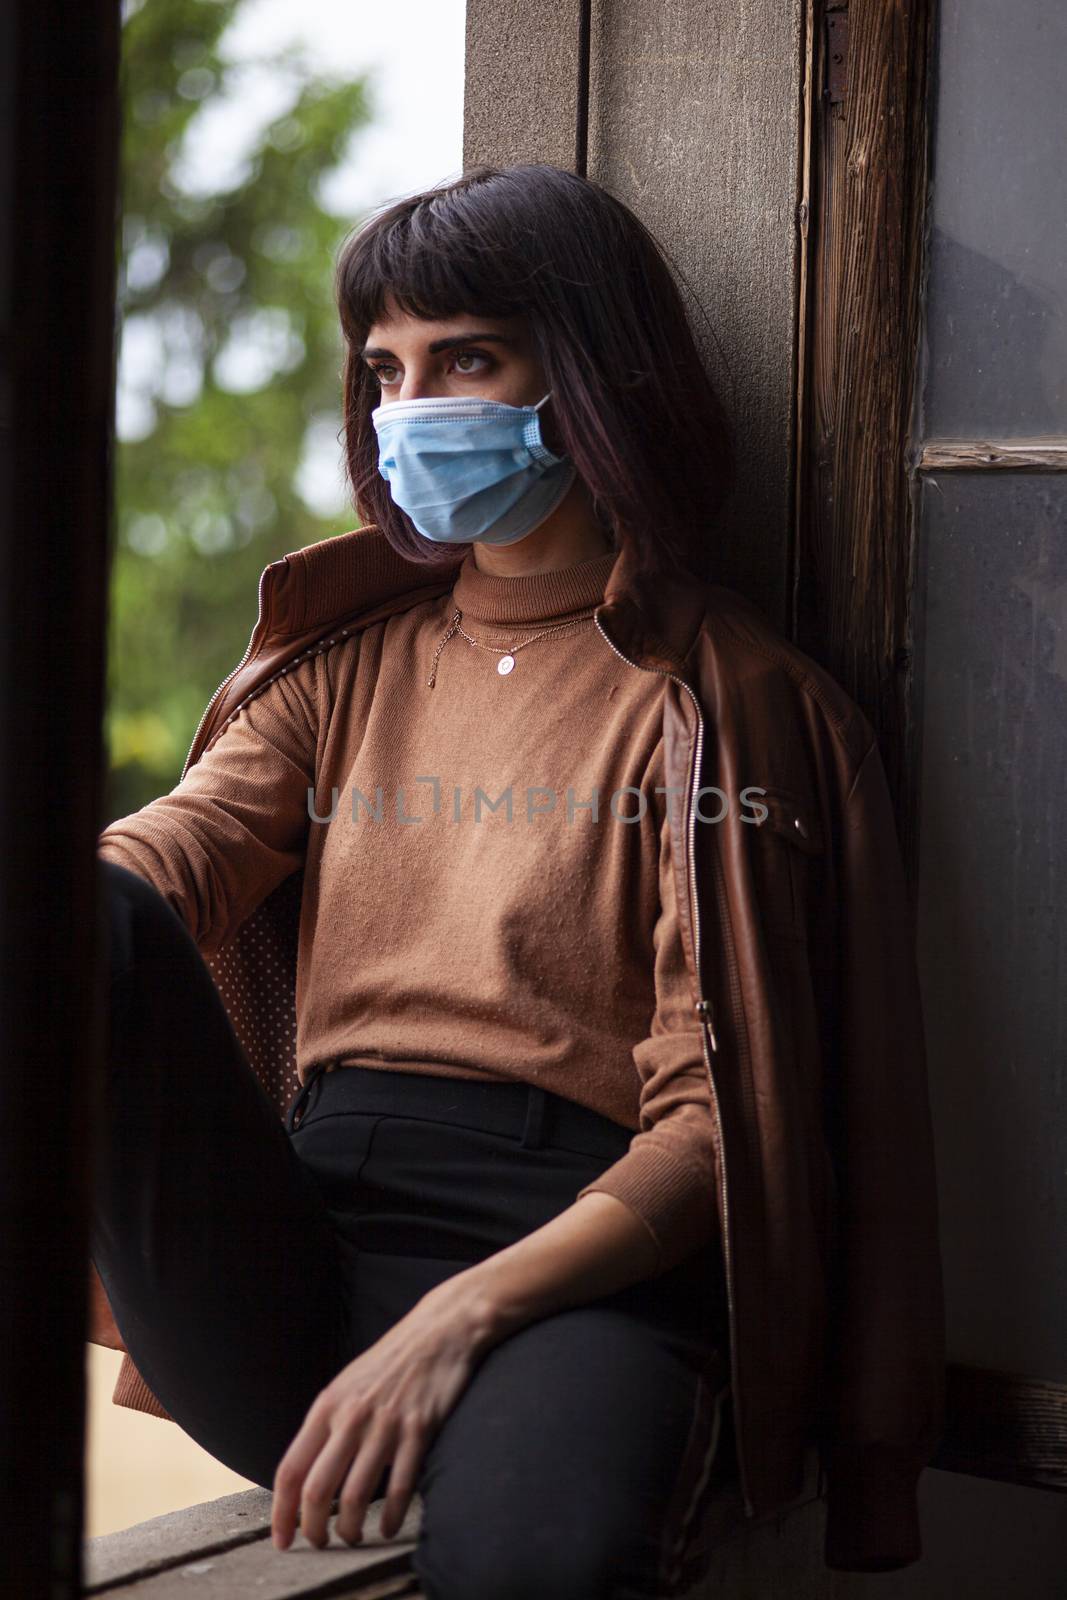 Girl with medical mask at window 11 by pippocarlot